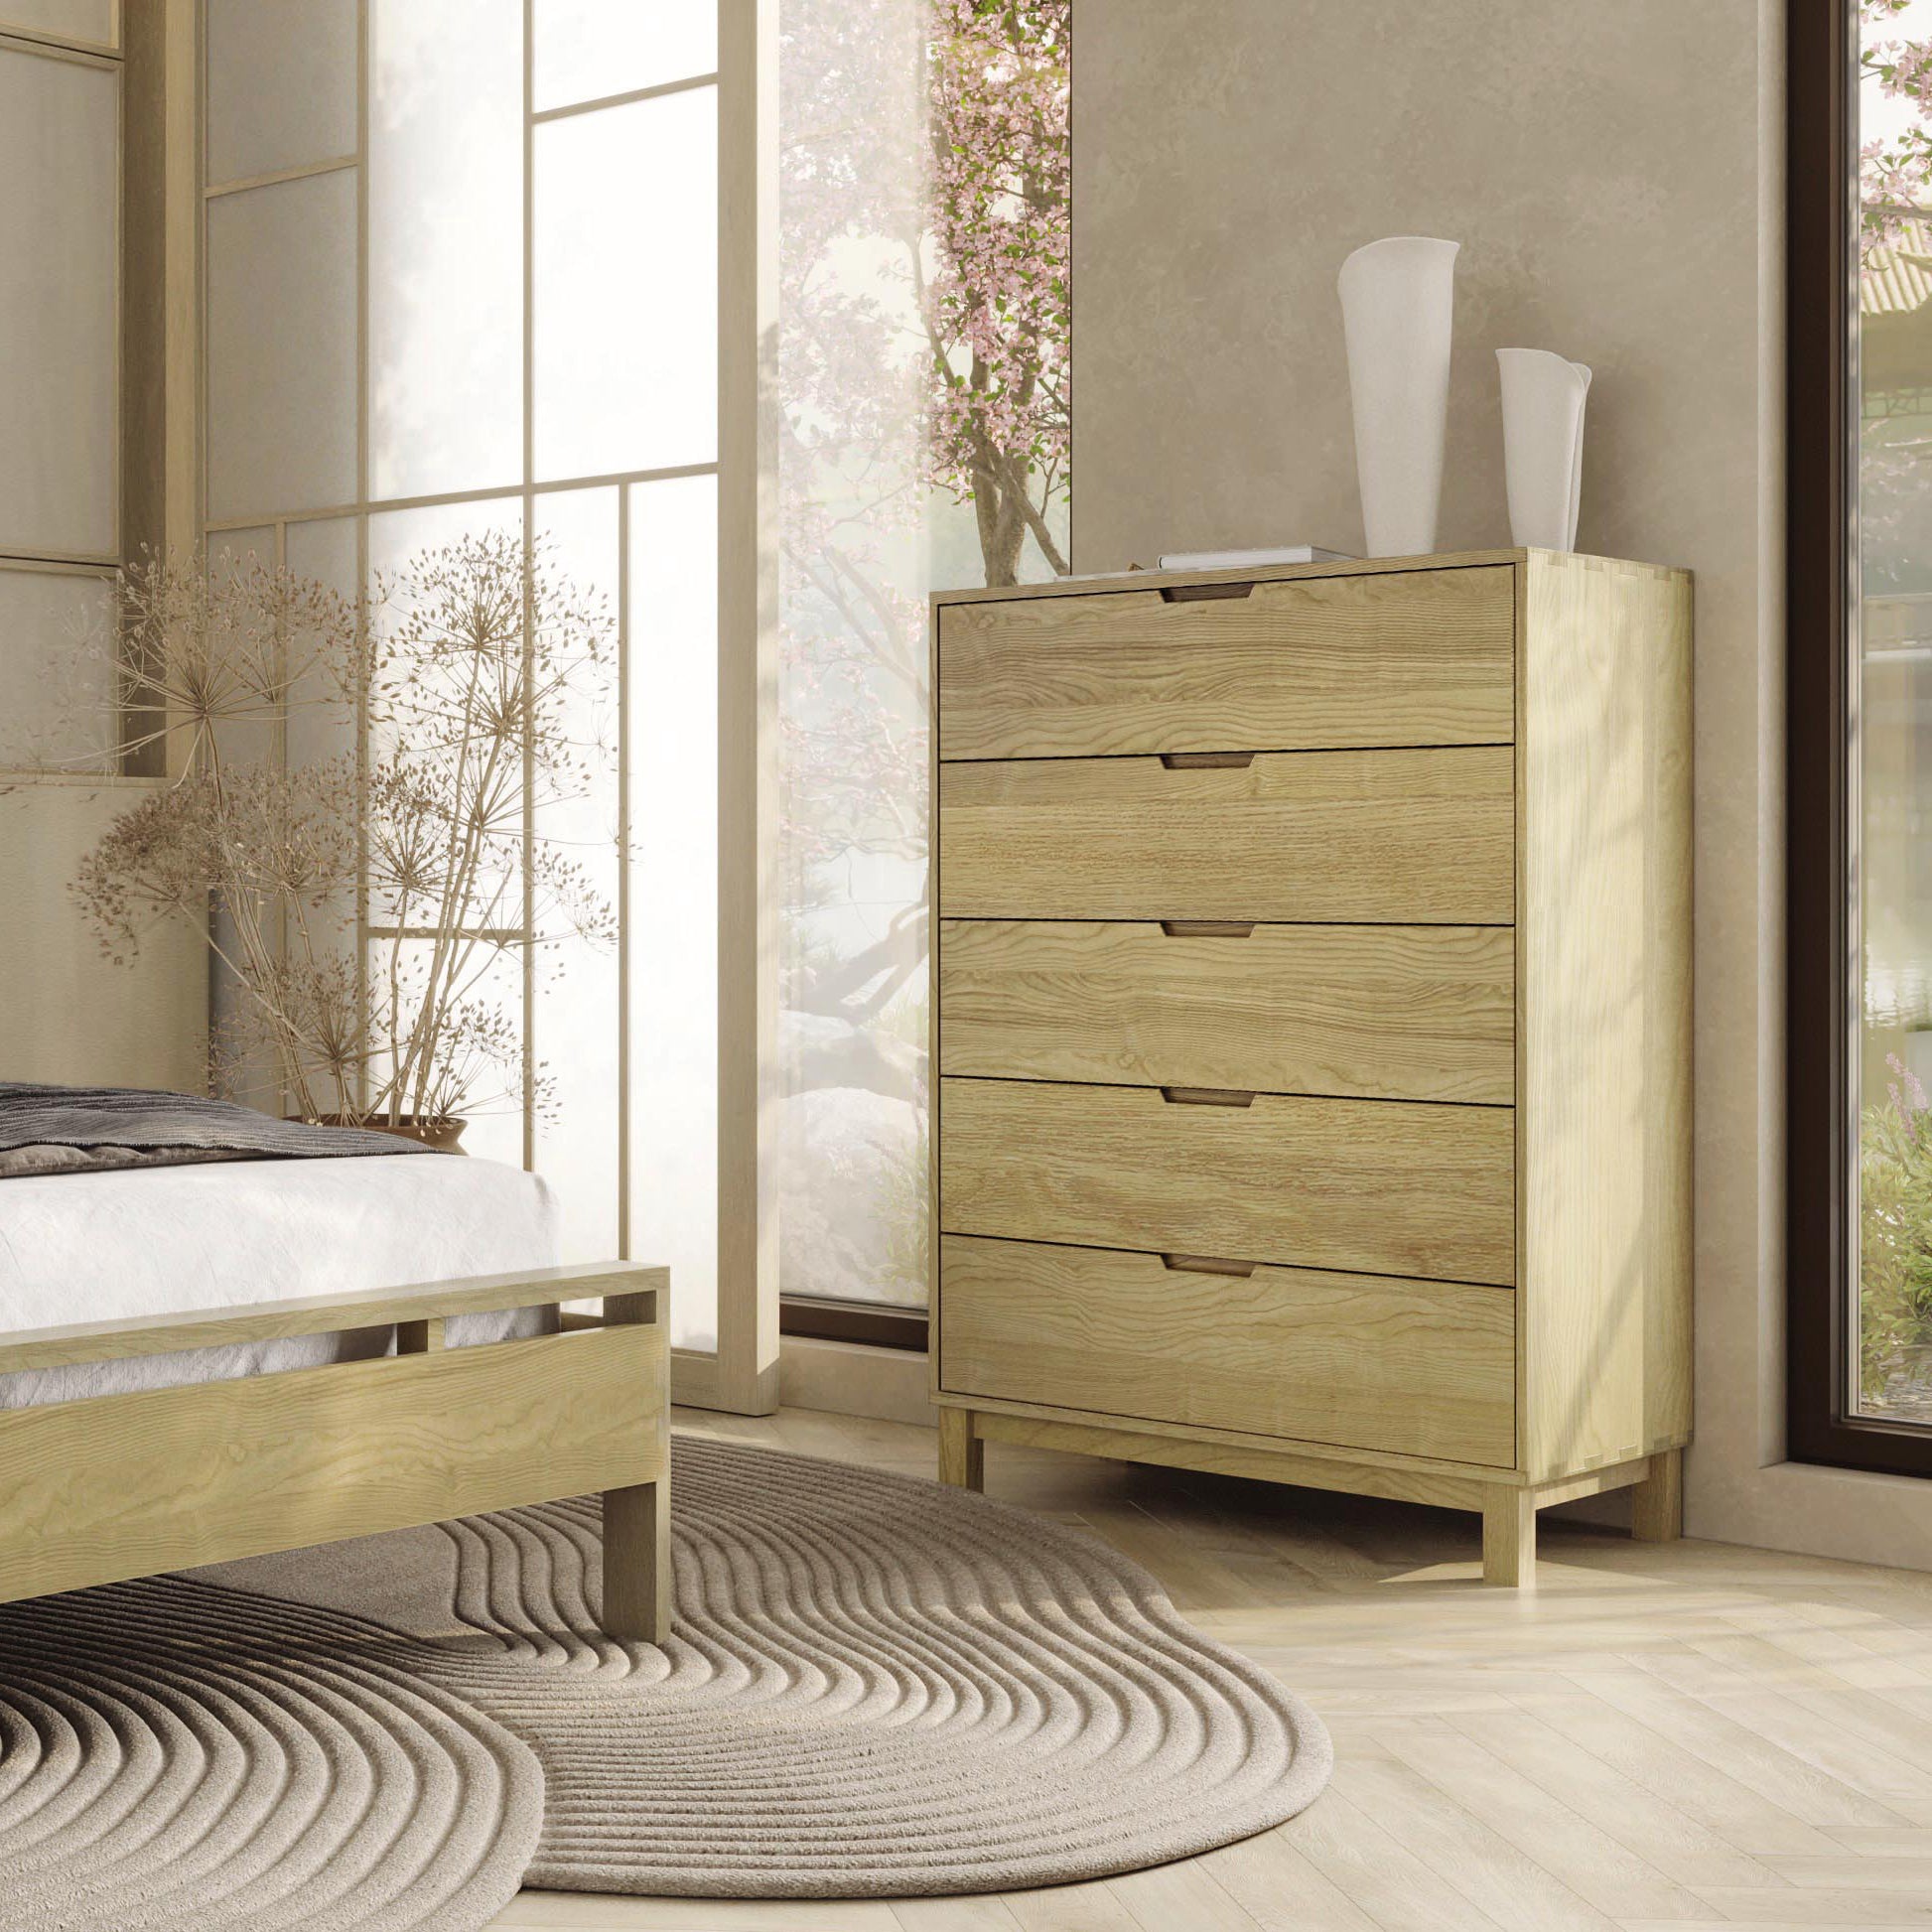 A modern bedroom with Solid Oak Hardwood Copeland Furniture Oslo Bedroom Furniture Collection, featuring a bed and an Oslo 5-Drawer Wide Chest, accentuated by a gray circular rug and tall white vases; natural light